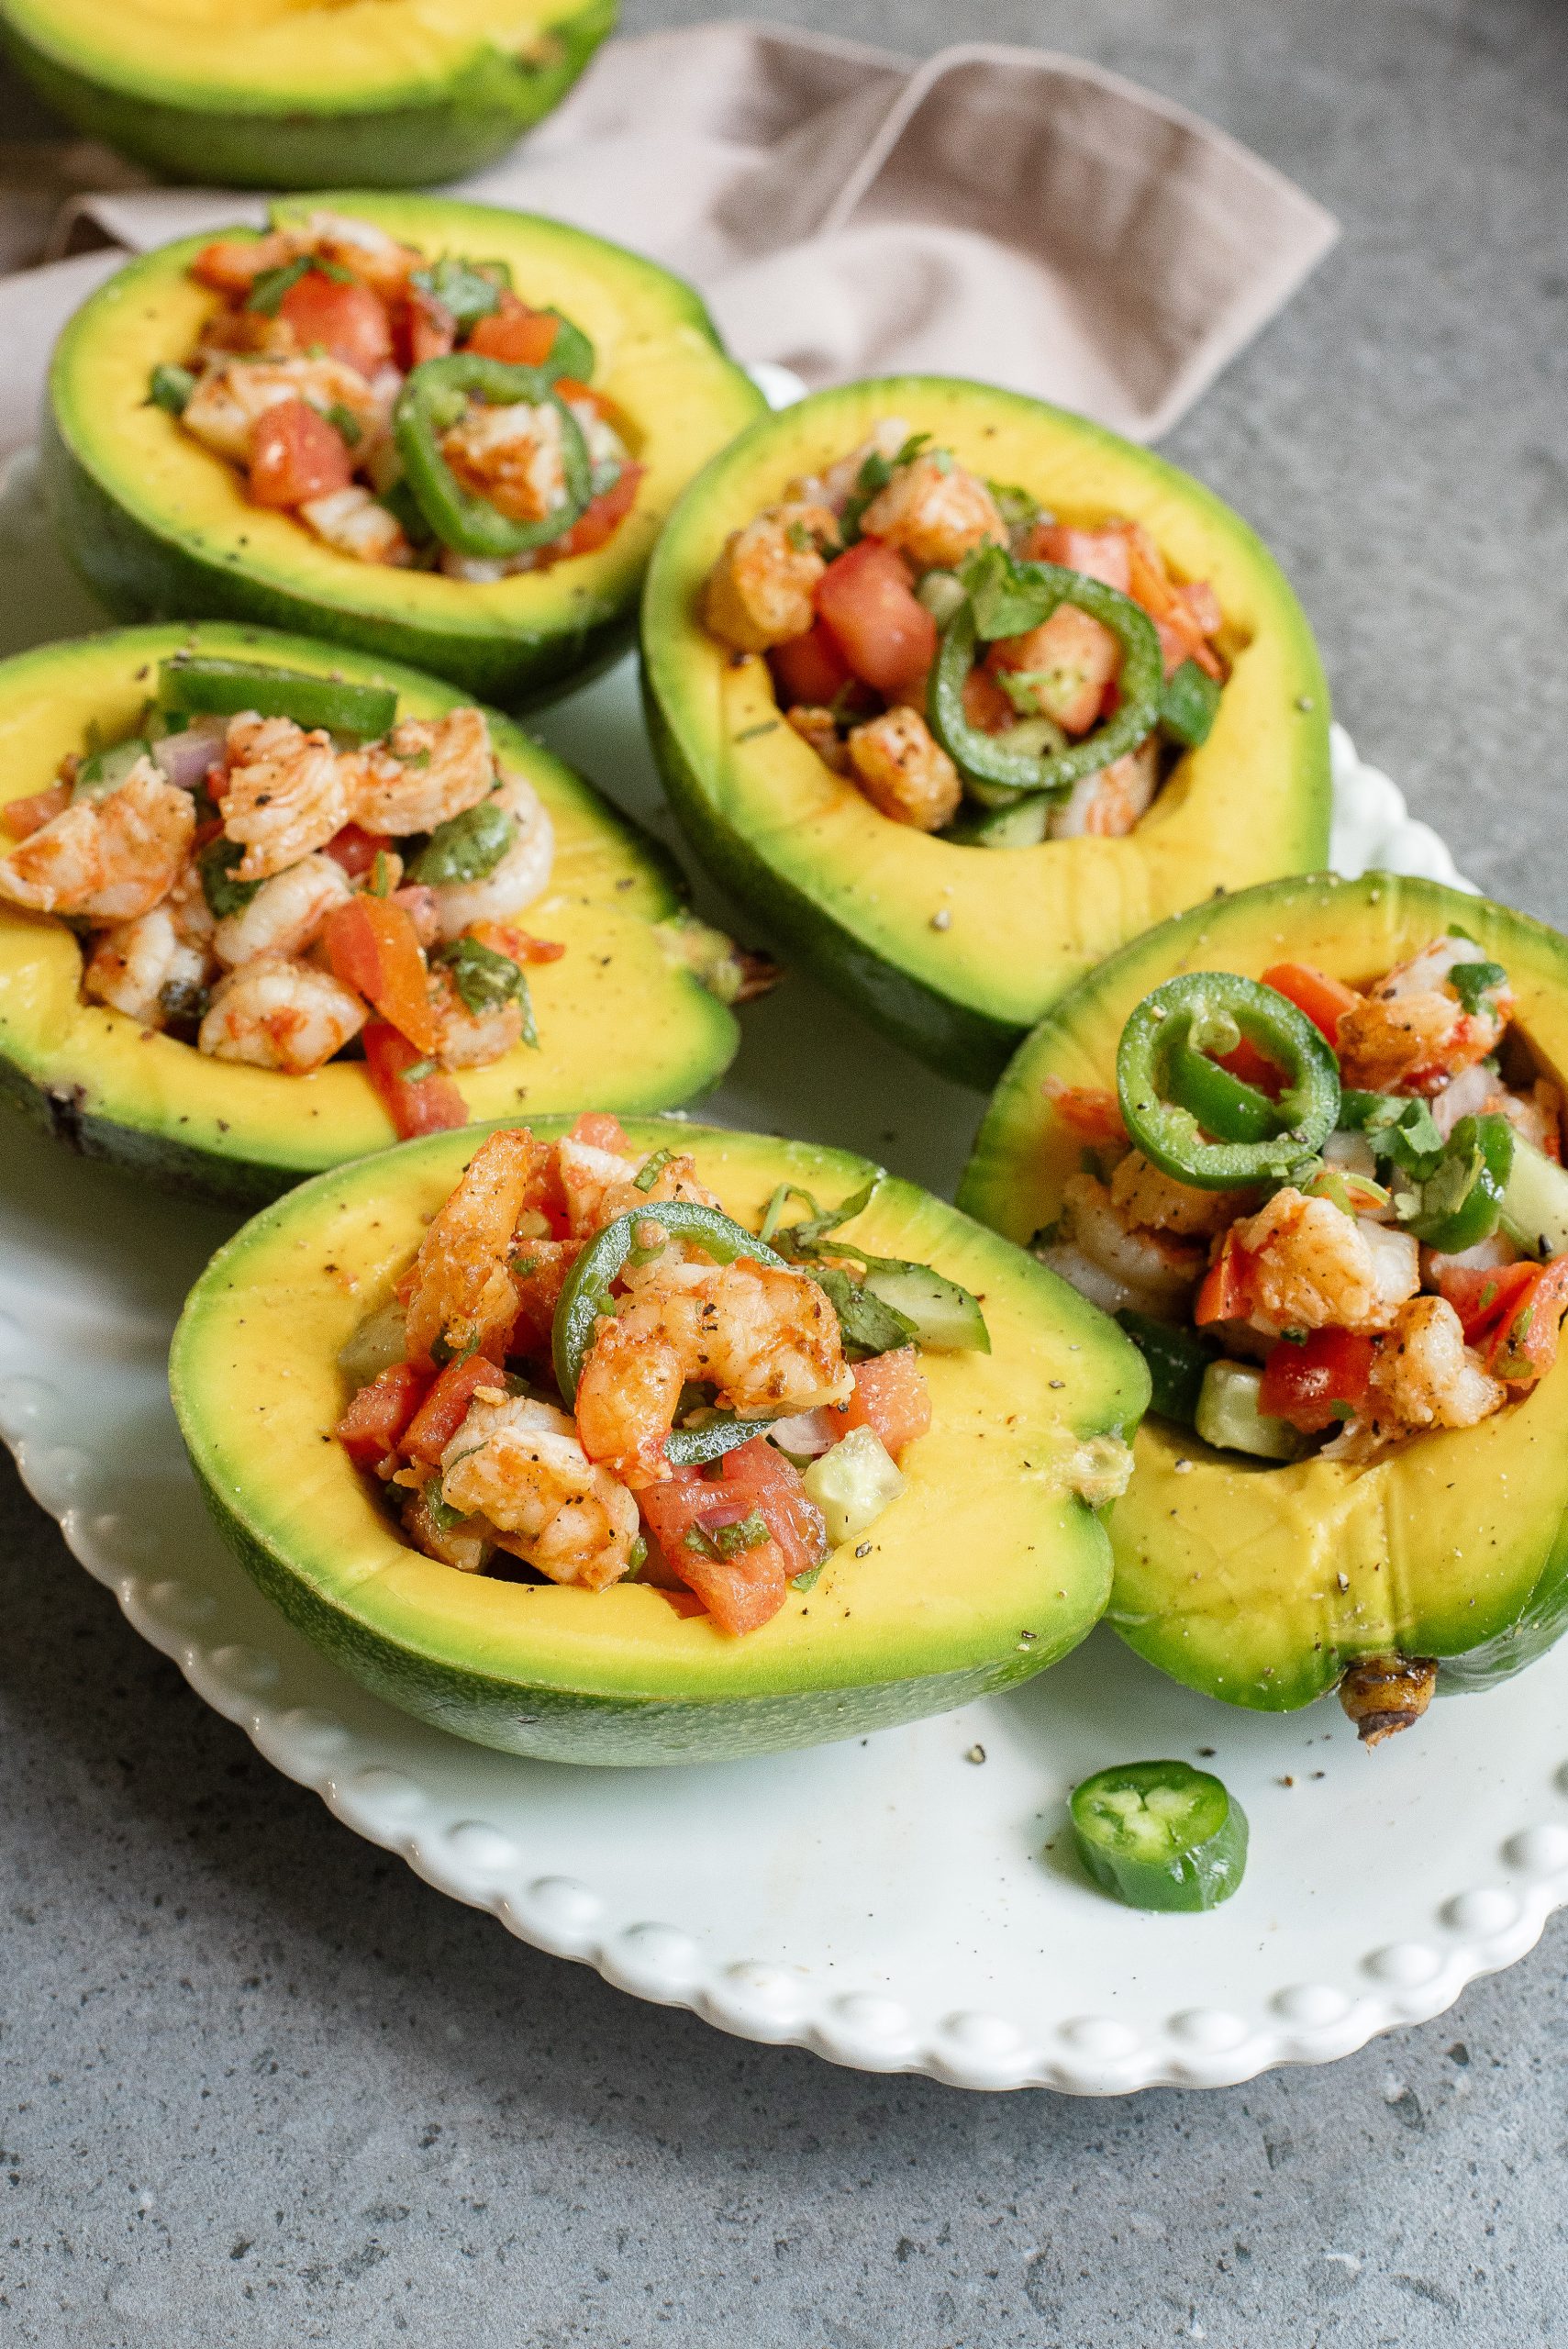 A plate of avocado halves filled with a shrimp and tomato salad, garnished with sliced jalapeños.